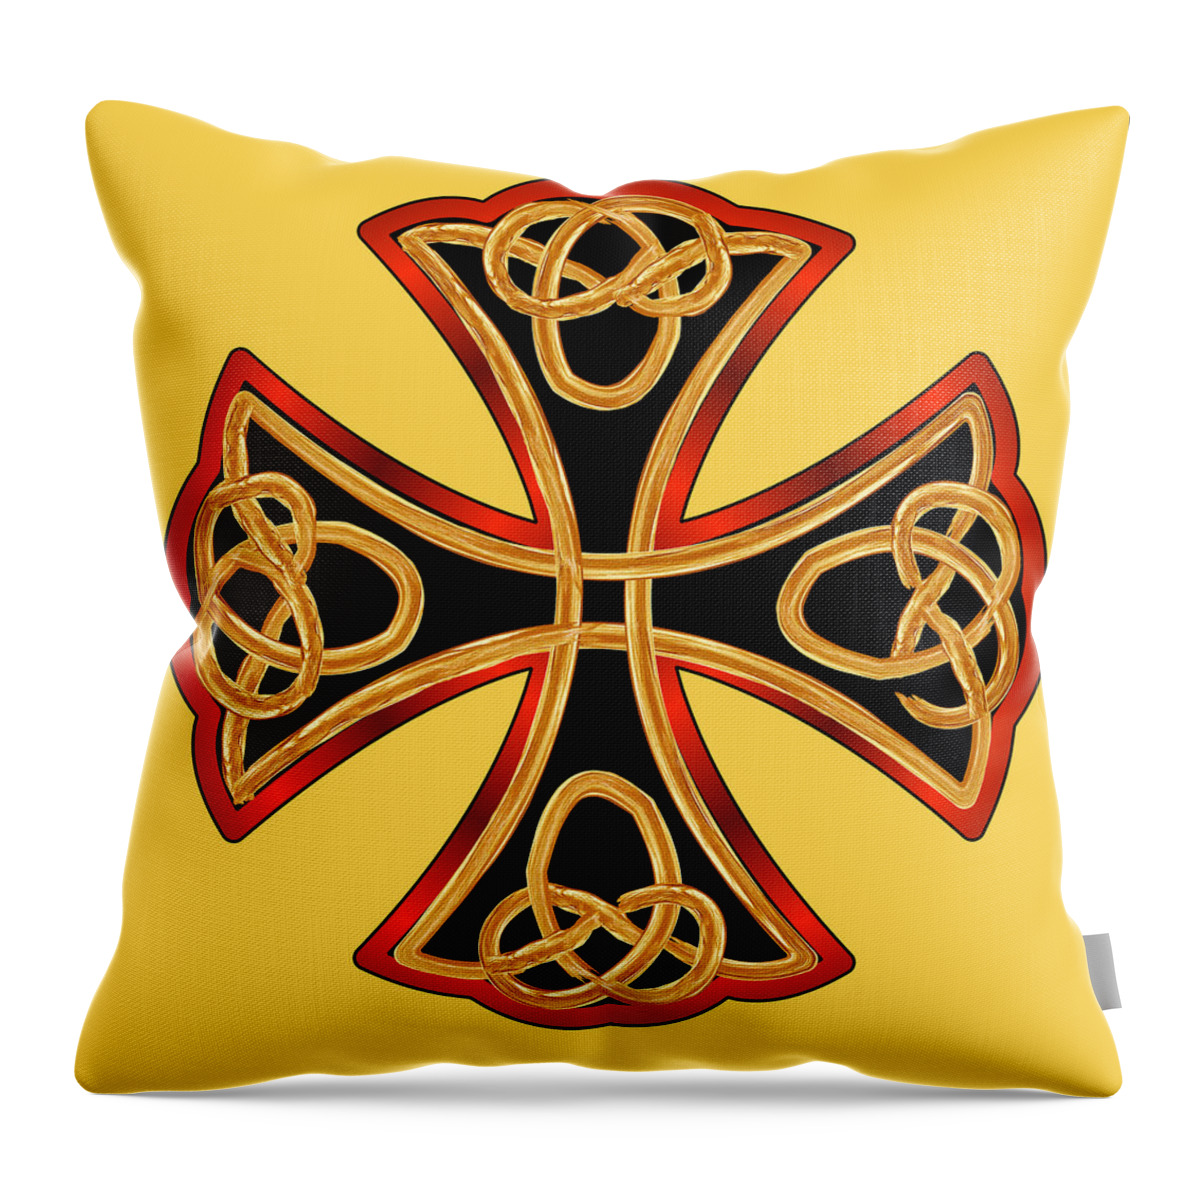 Britian Throw Pillow featuring the photograph Celtic Cross In Yellow by Theresa Tahara